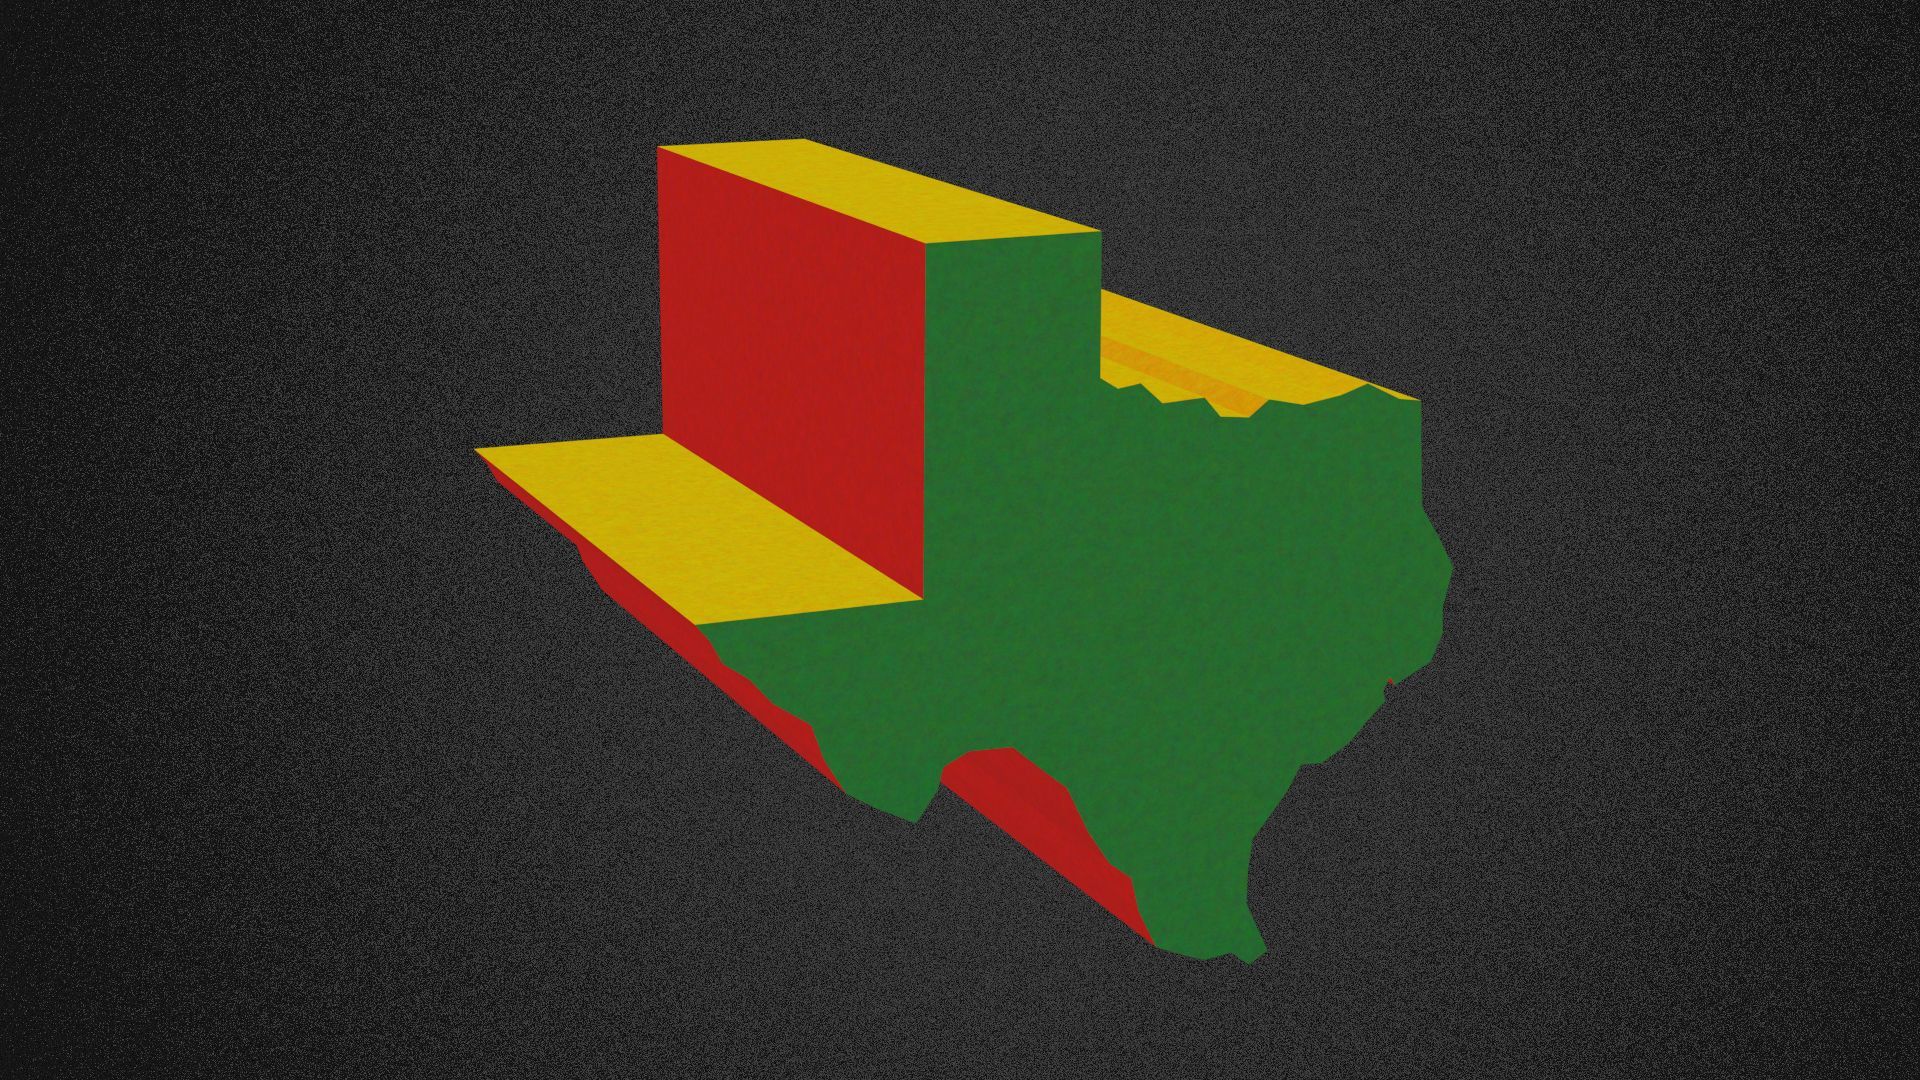 Illustration of the state of Texas lit by red, green and yellow lights.